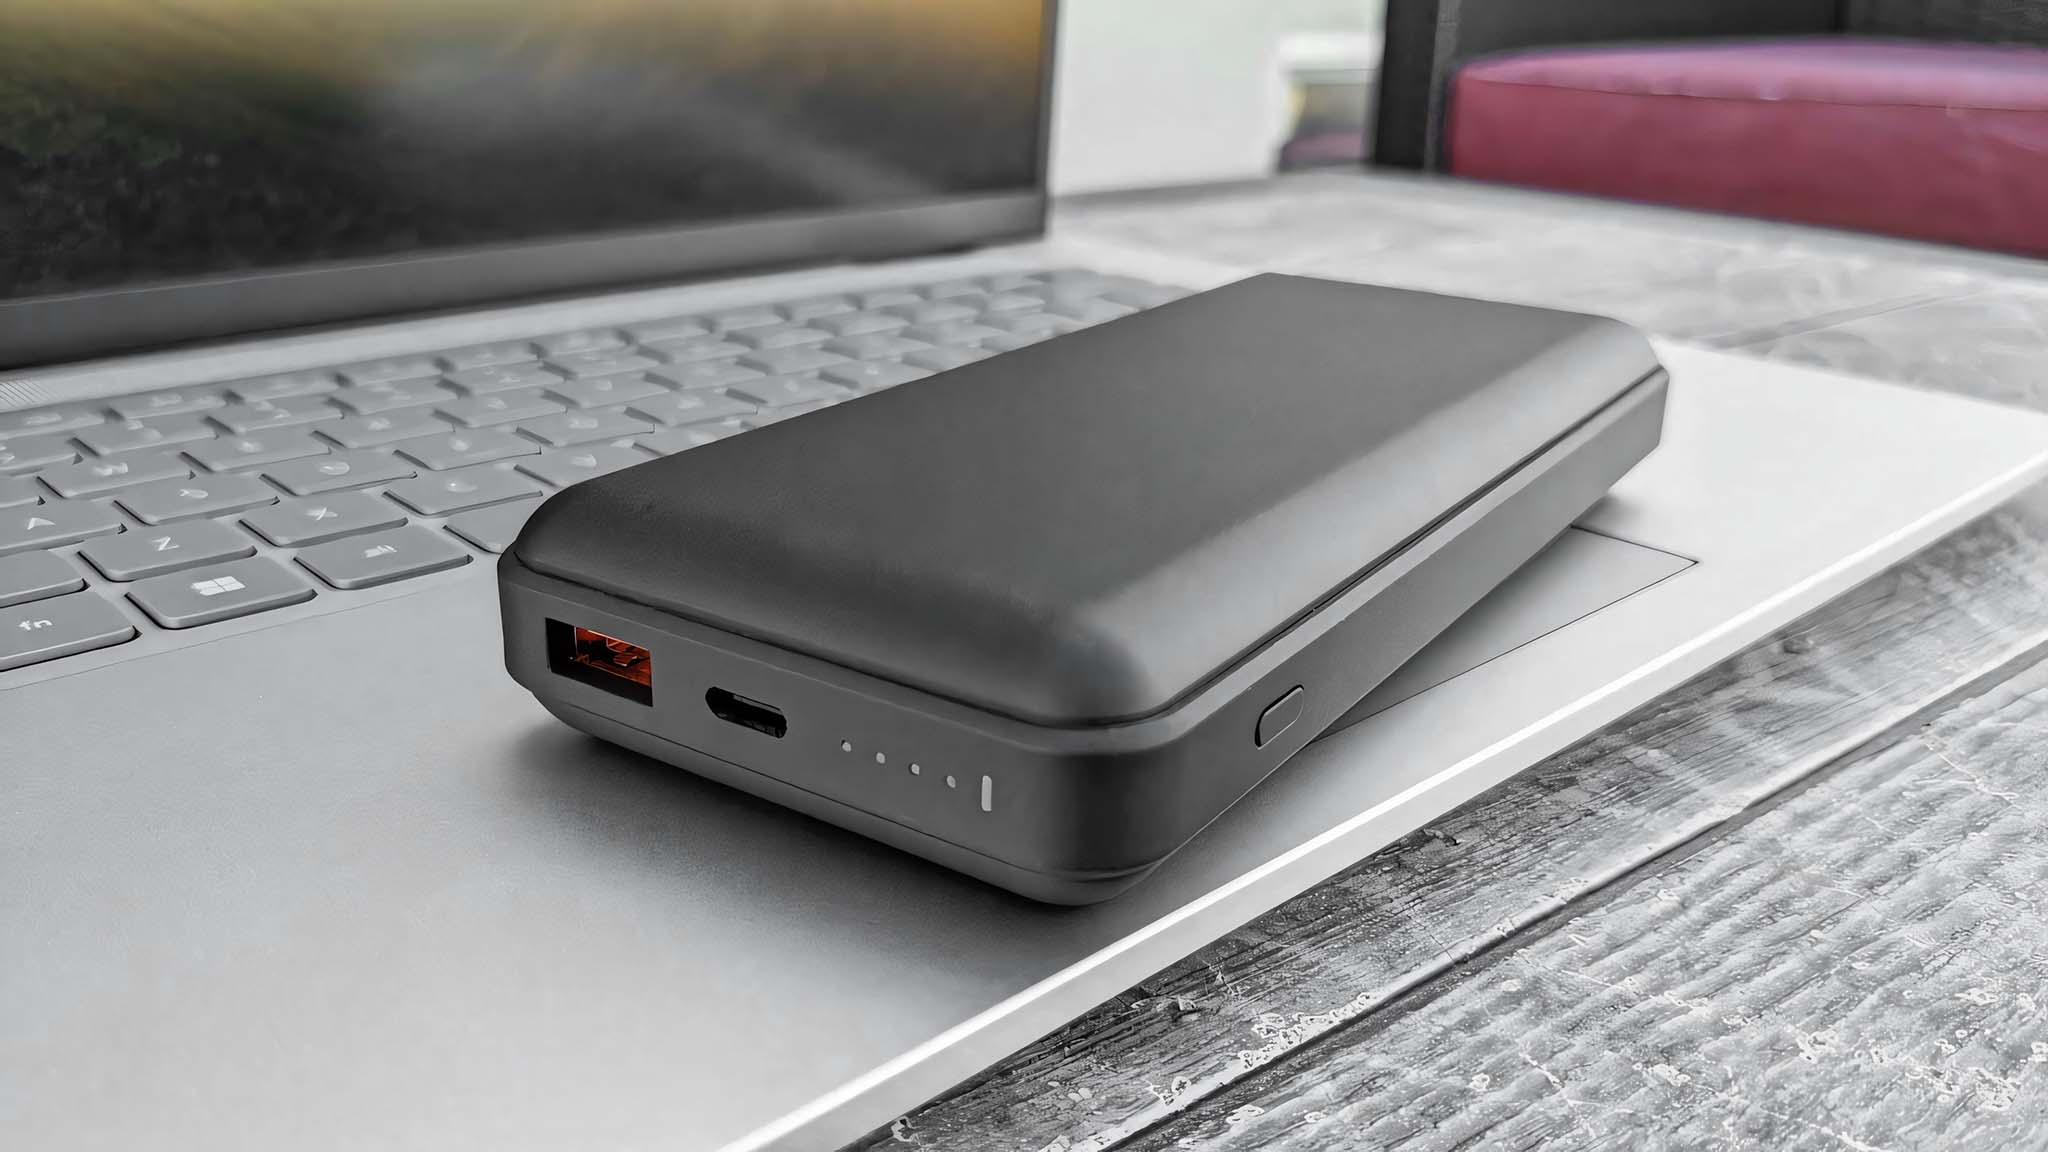 Anker 548 Power Bank - The Ultimate Camping Power Bank with USB-C and  60000mAh Capacity - Anker US